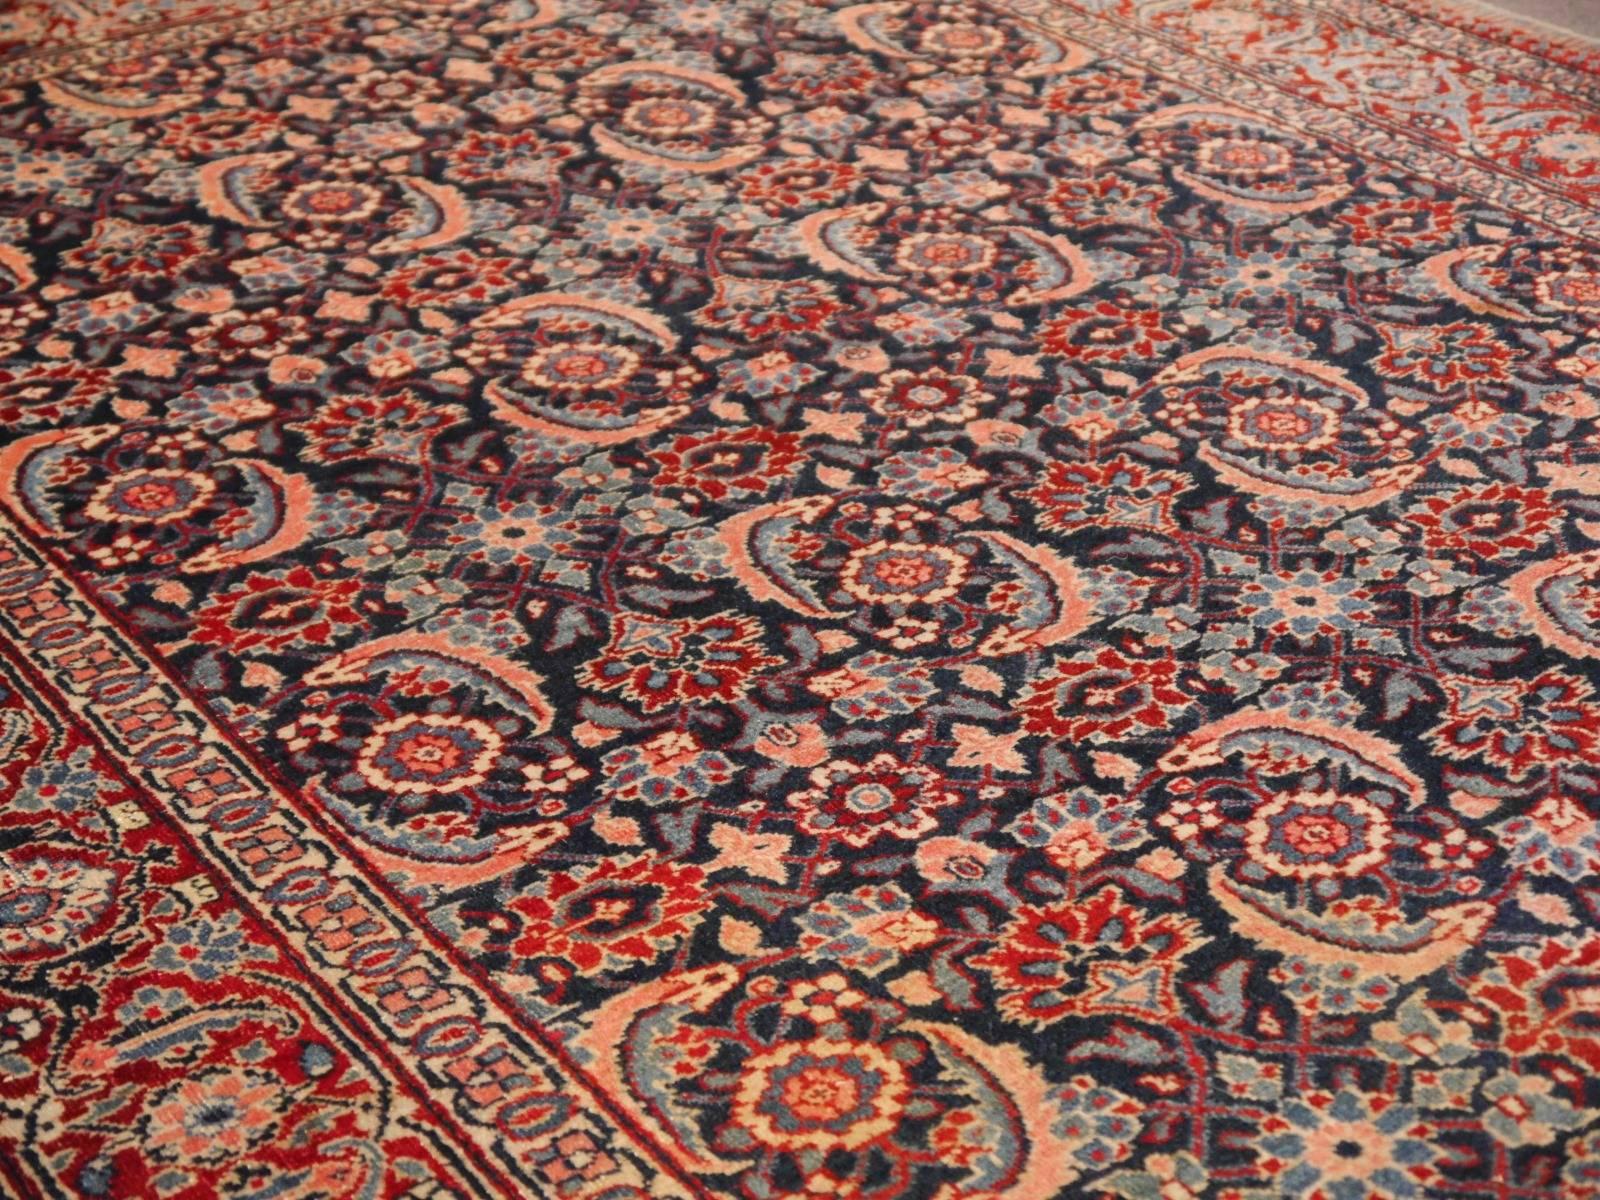 Antique Rug Mahi Design Haji Style Blue and Red Allover In Good Condition For Sale In Lohr, Bavaria, DE